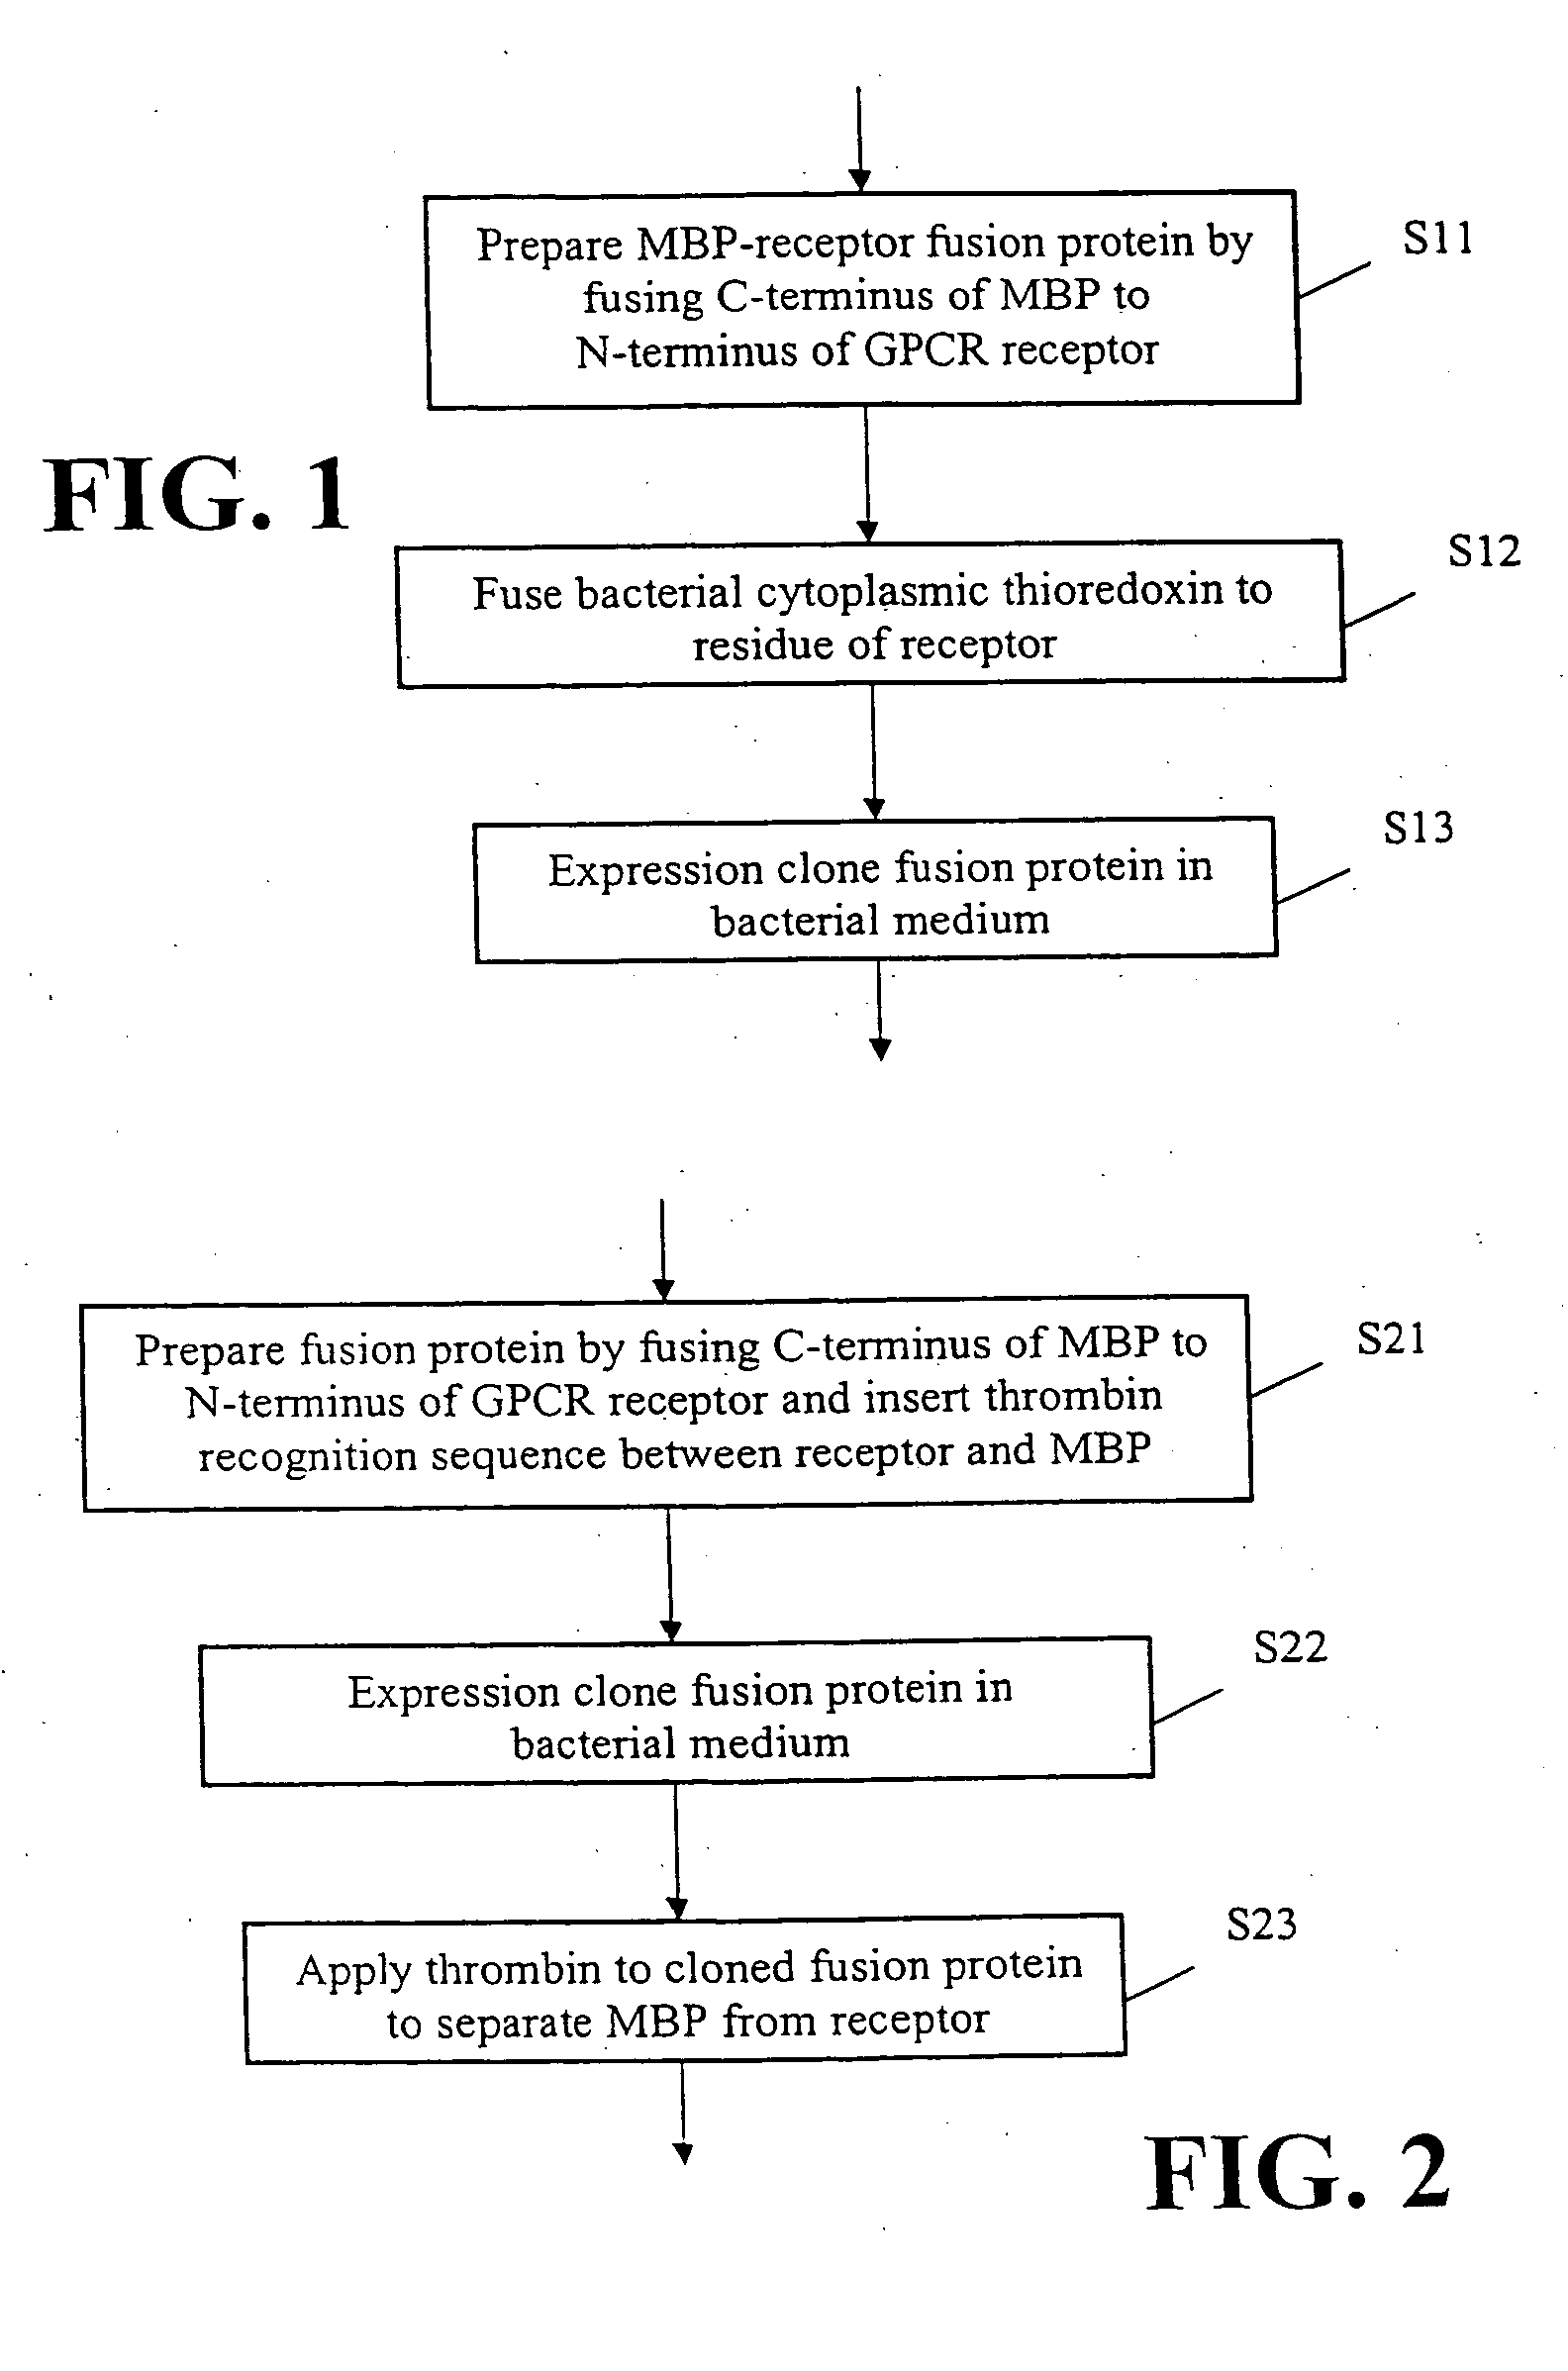 Processing for producing and crystallizing G-protein coupled receptors